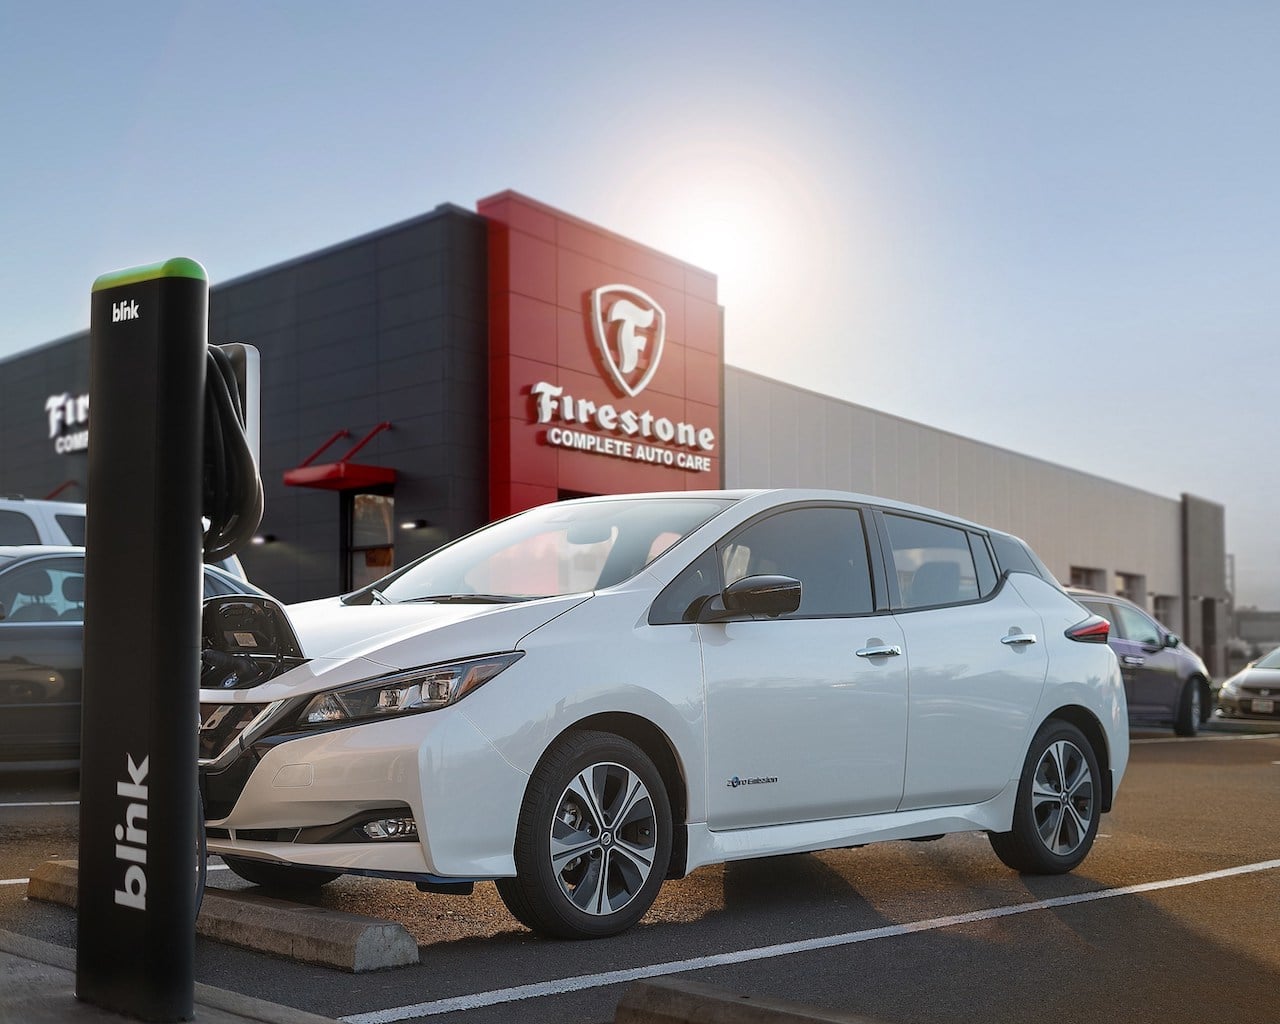 Bridgestone Retail Operations to Offer Expanded Electric Vehicle Services, Add Vehicle Charging in Select Markets